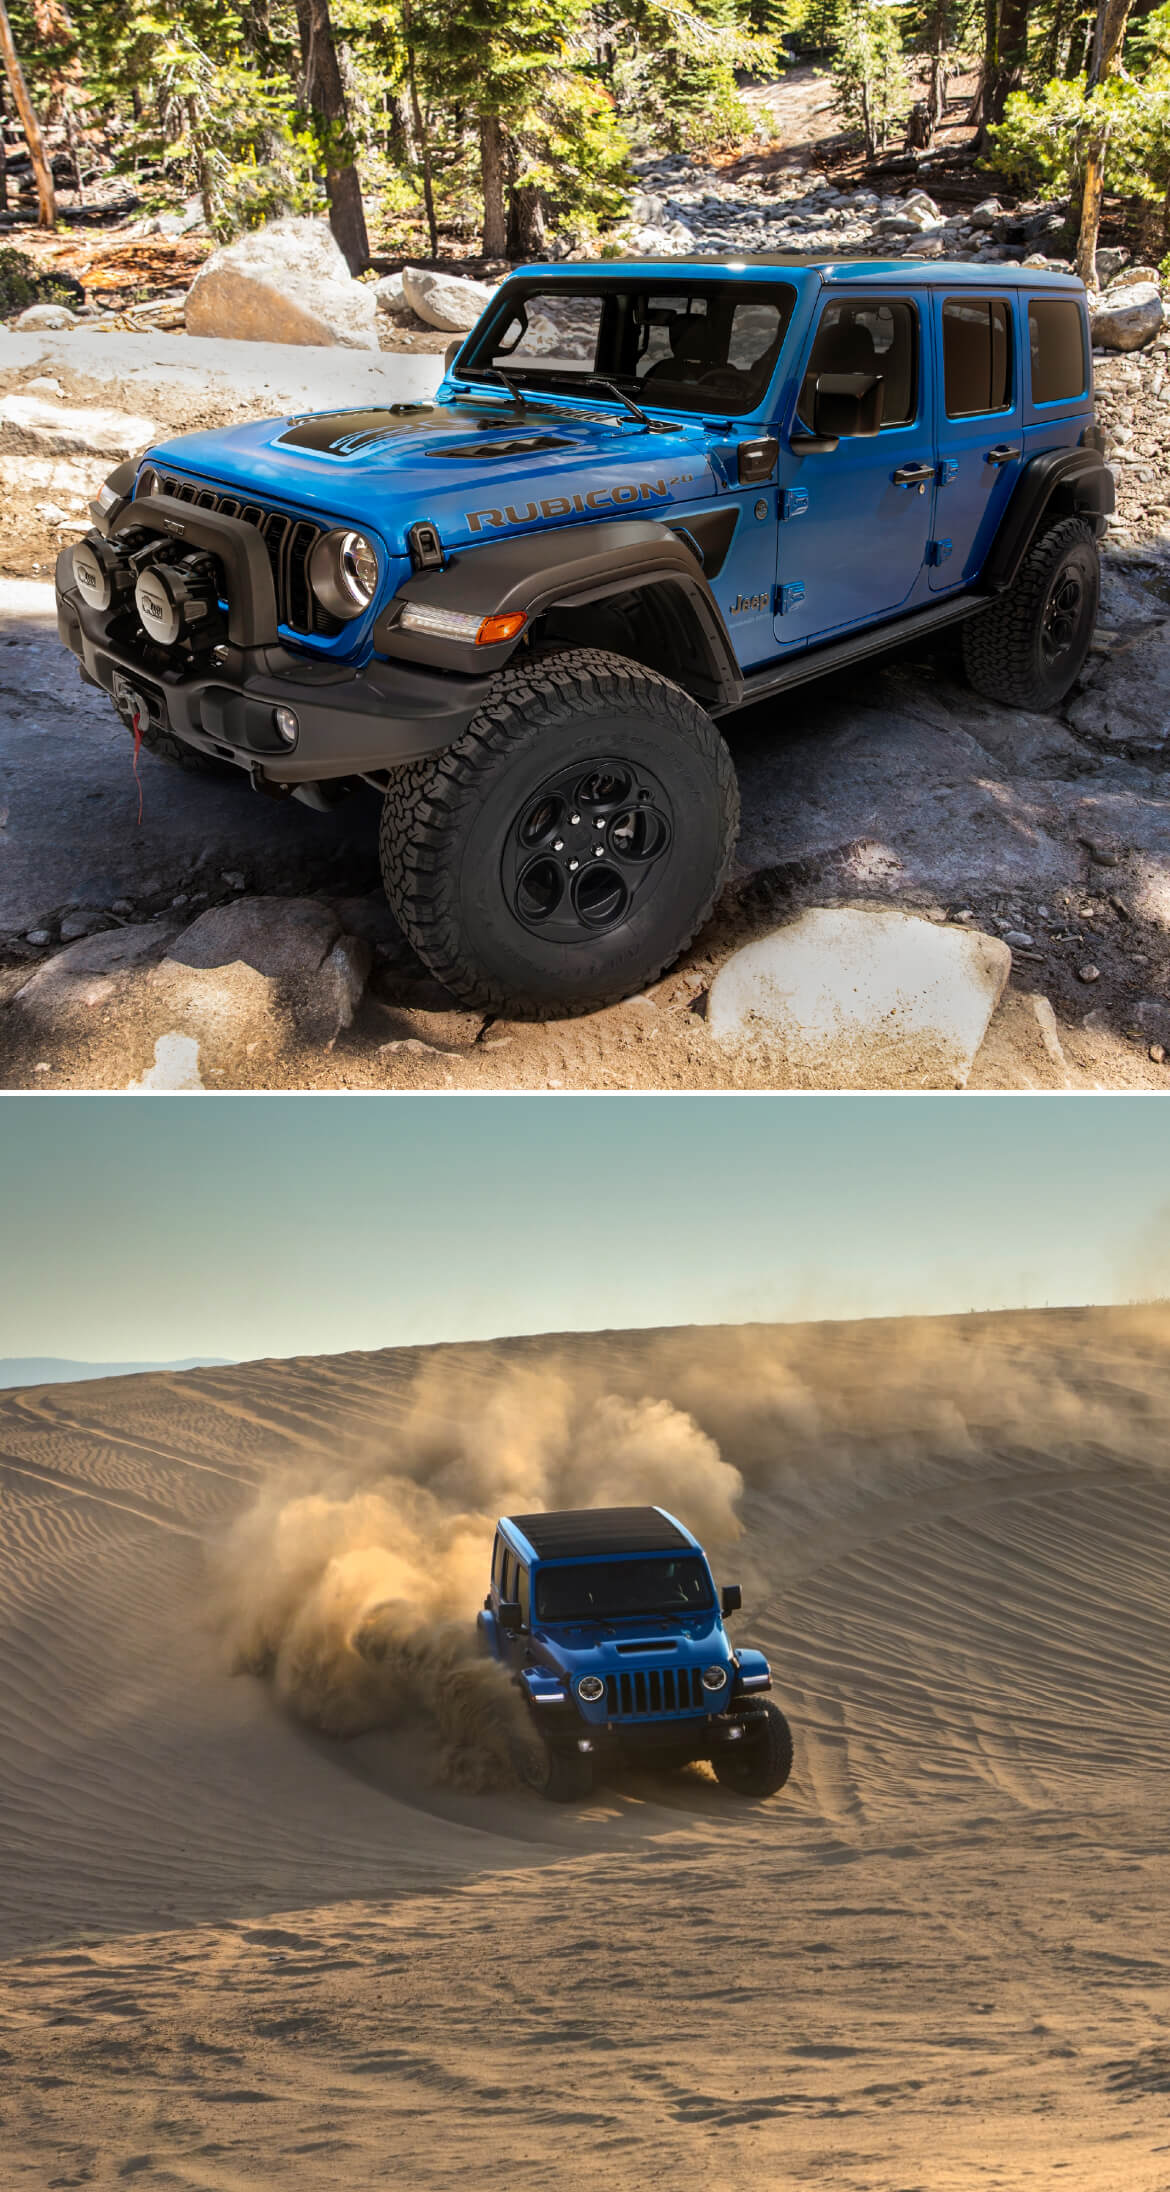 Jeep Wrangler Accessories: Find Your Favorite